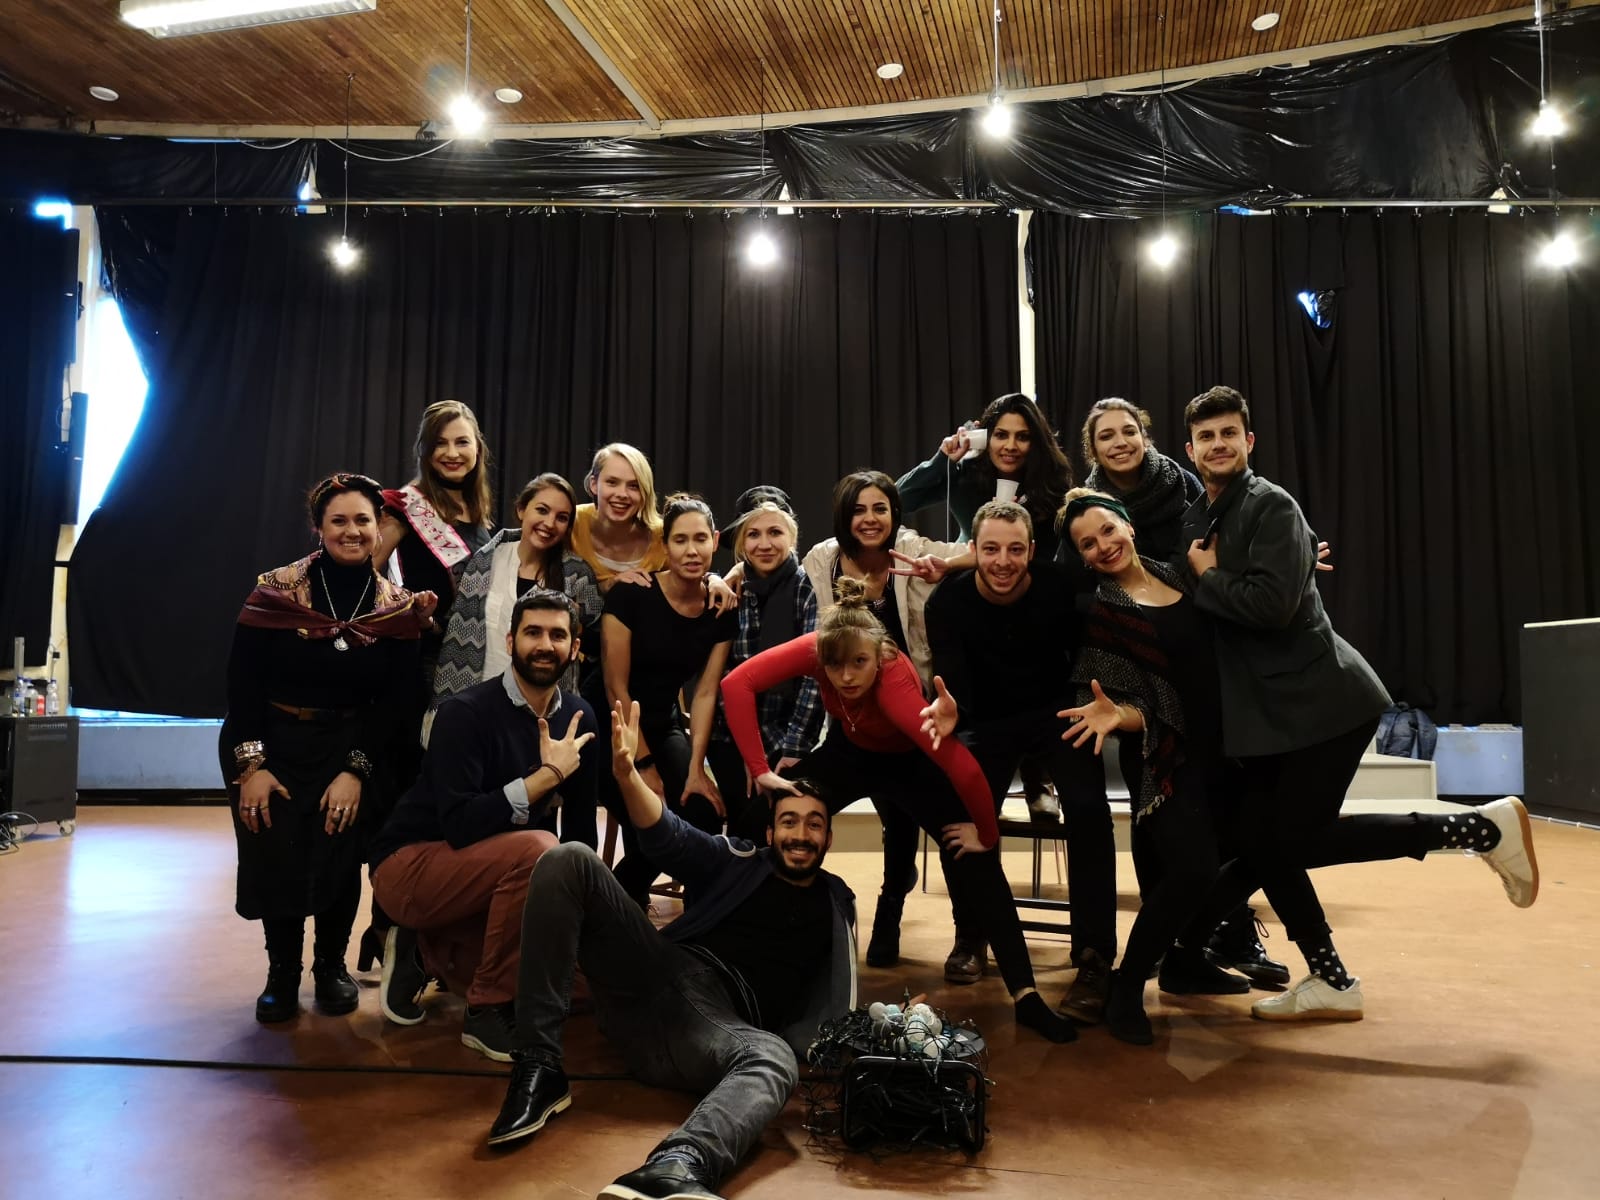 Photo from the show "The Skin of our Teeth". A group of people pose for the picture. Most of them wear black. At the back, there is a black curtain